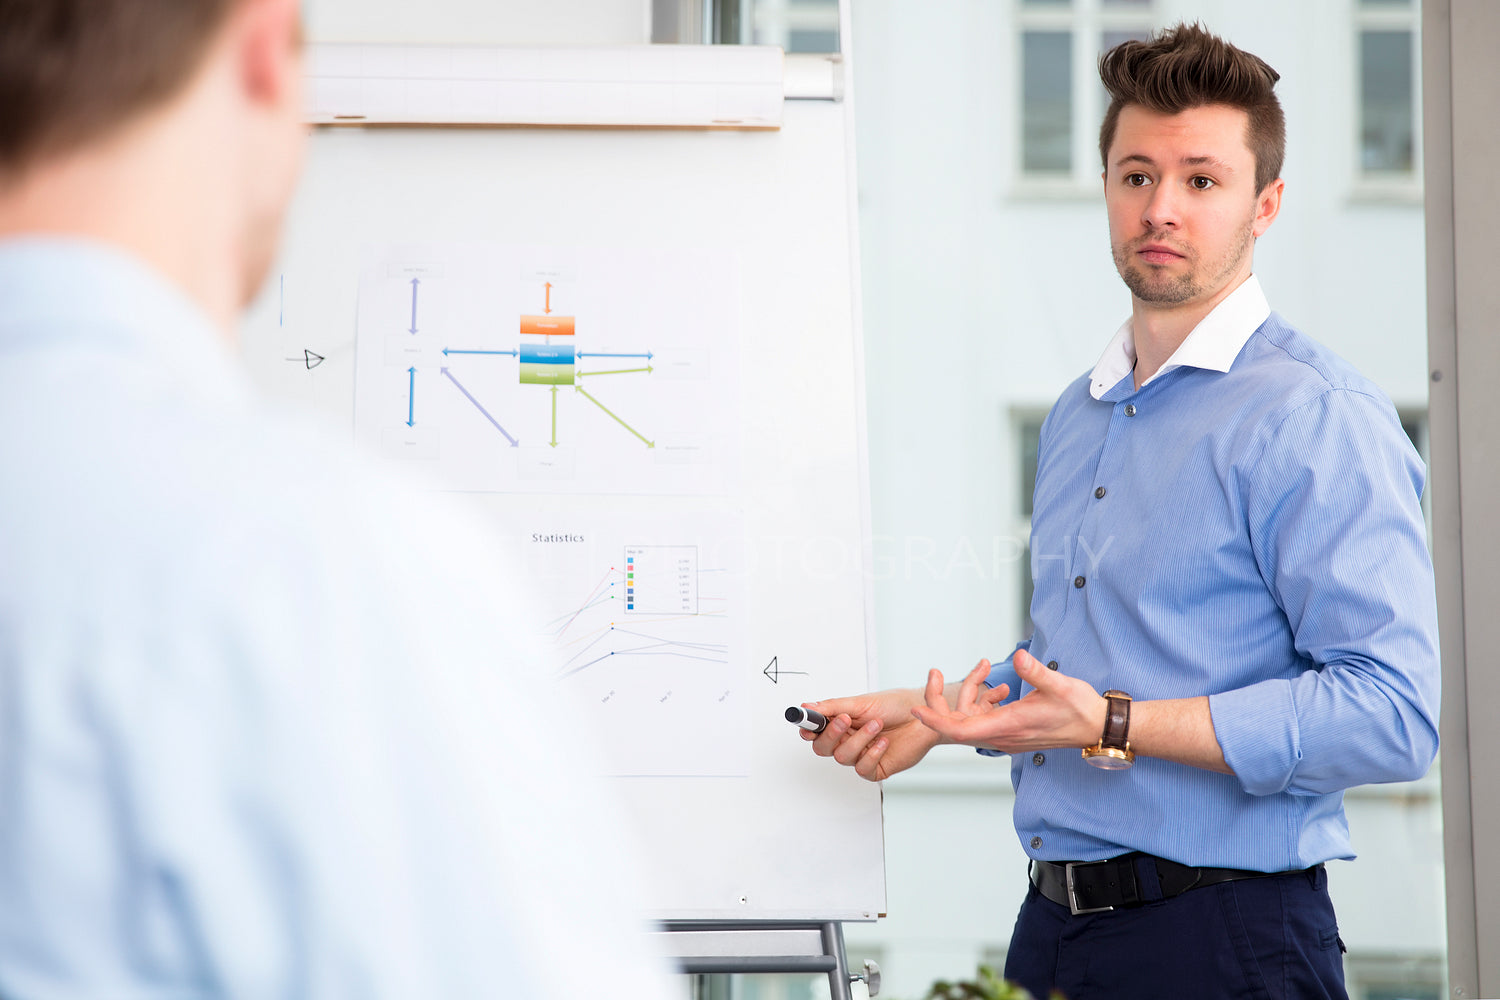 Executive Explaining Presentation To Colleague In Office